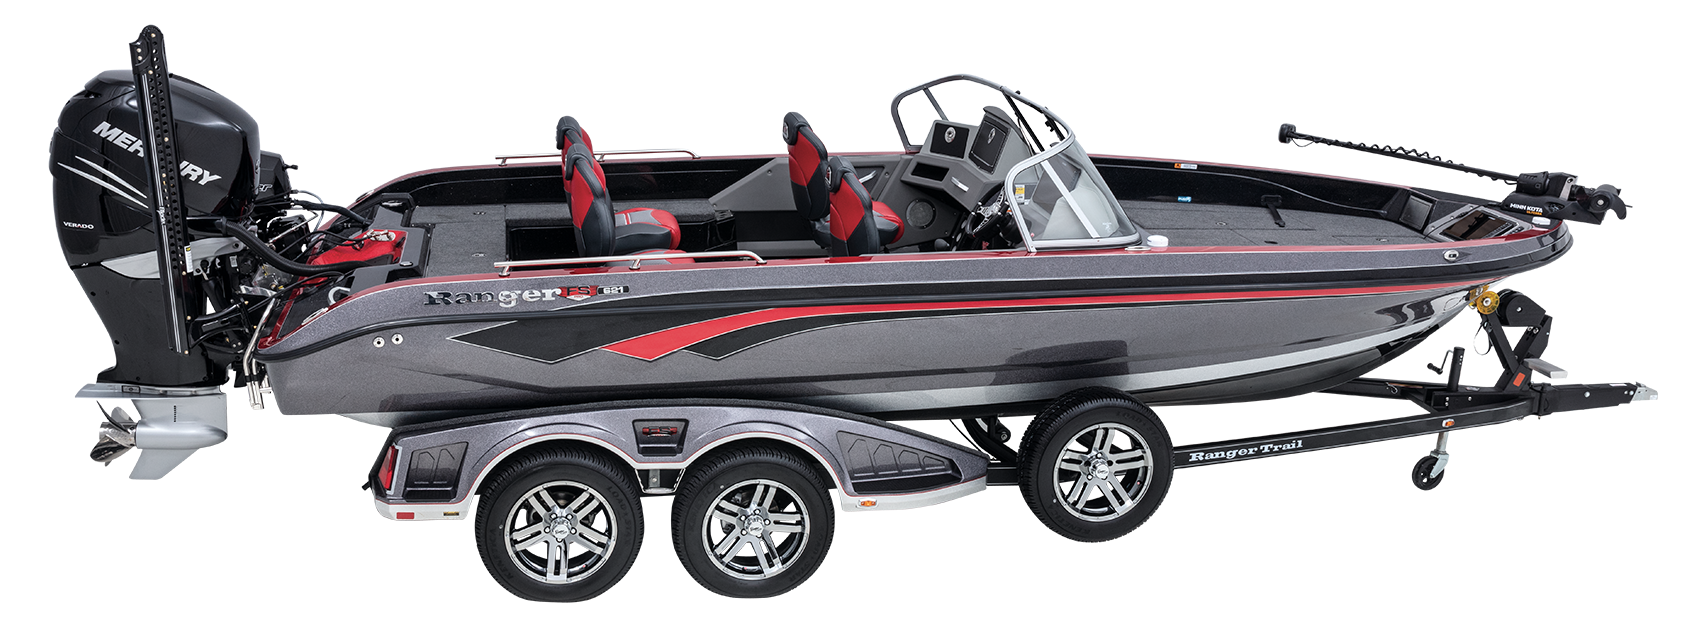 https://www.rangerboats.com/content/dam/wrmg-photography/boat-photography/ranger/fiberglass/multi-species/fisherman/621FS%20PRO/2020/pngs/20_RAFI_621FSPROTOURINGPACKAGEWDUALPROCHARGER_SS001.png